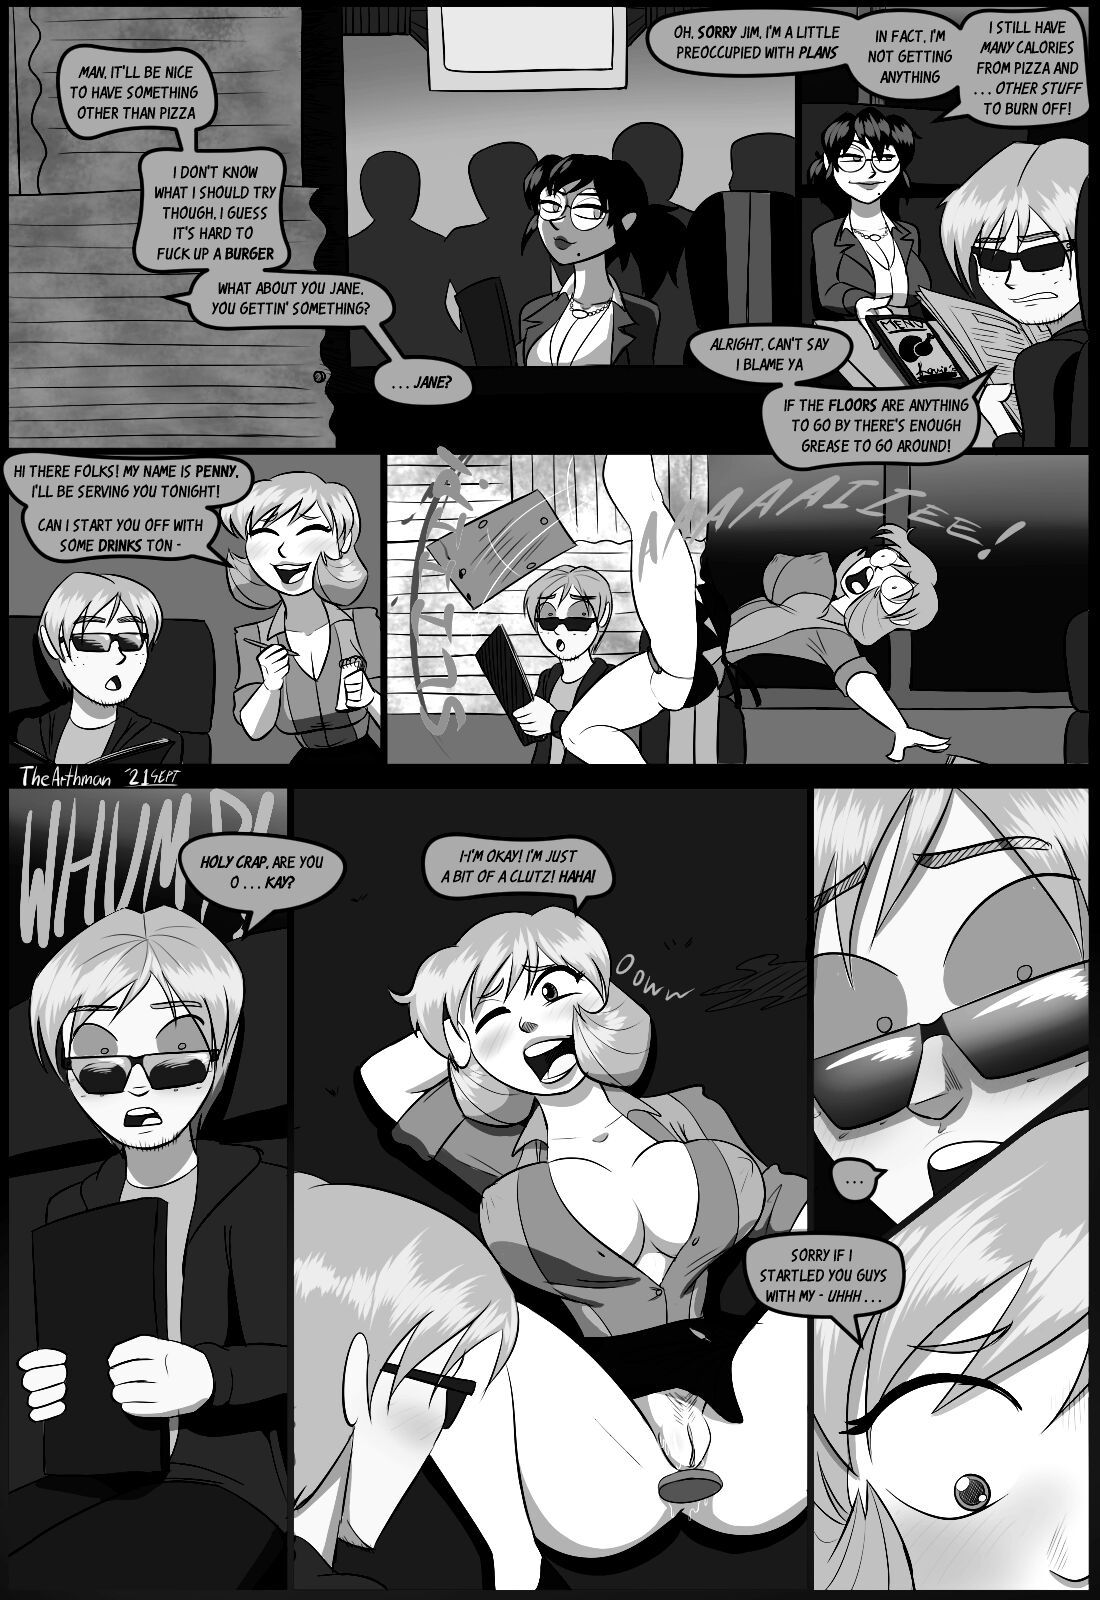 Dirtwater - Part 5 - One Night at Louie’s Porn Comic english 07